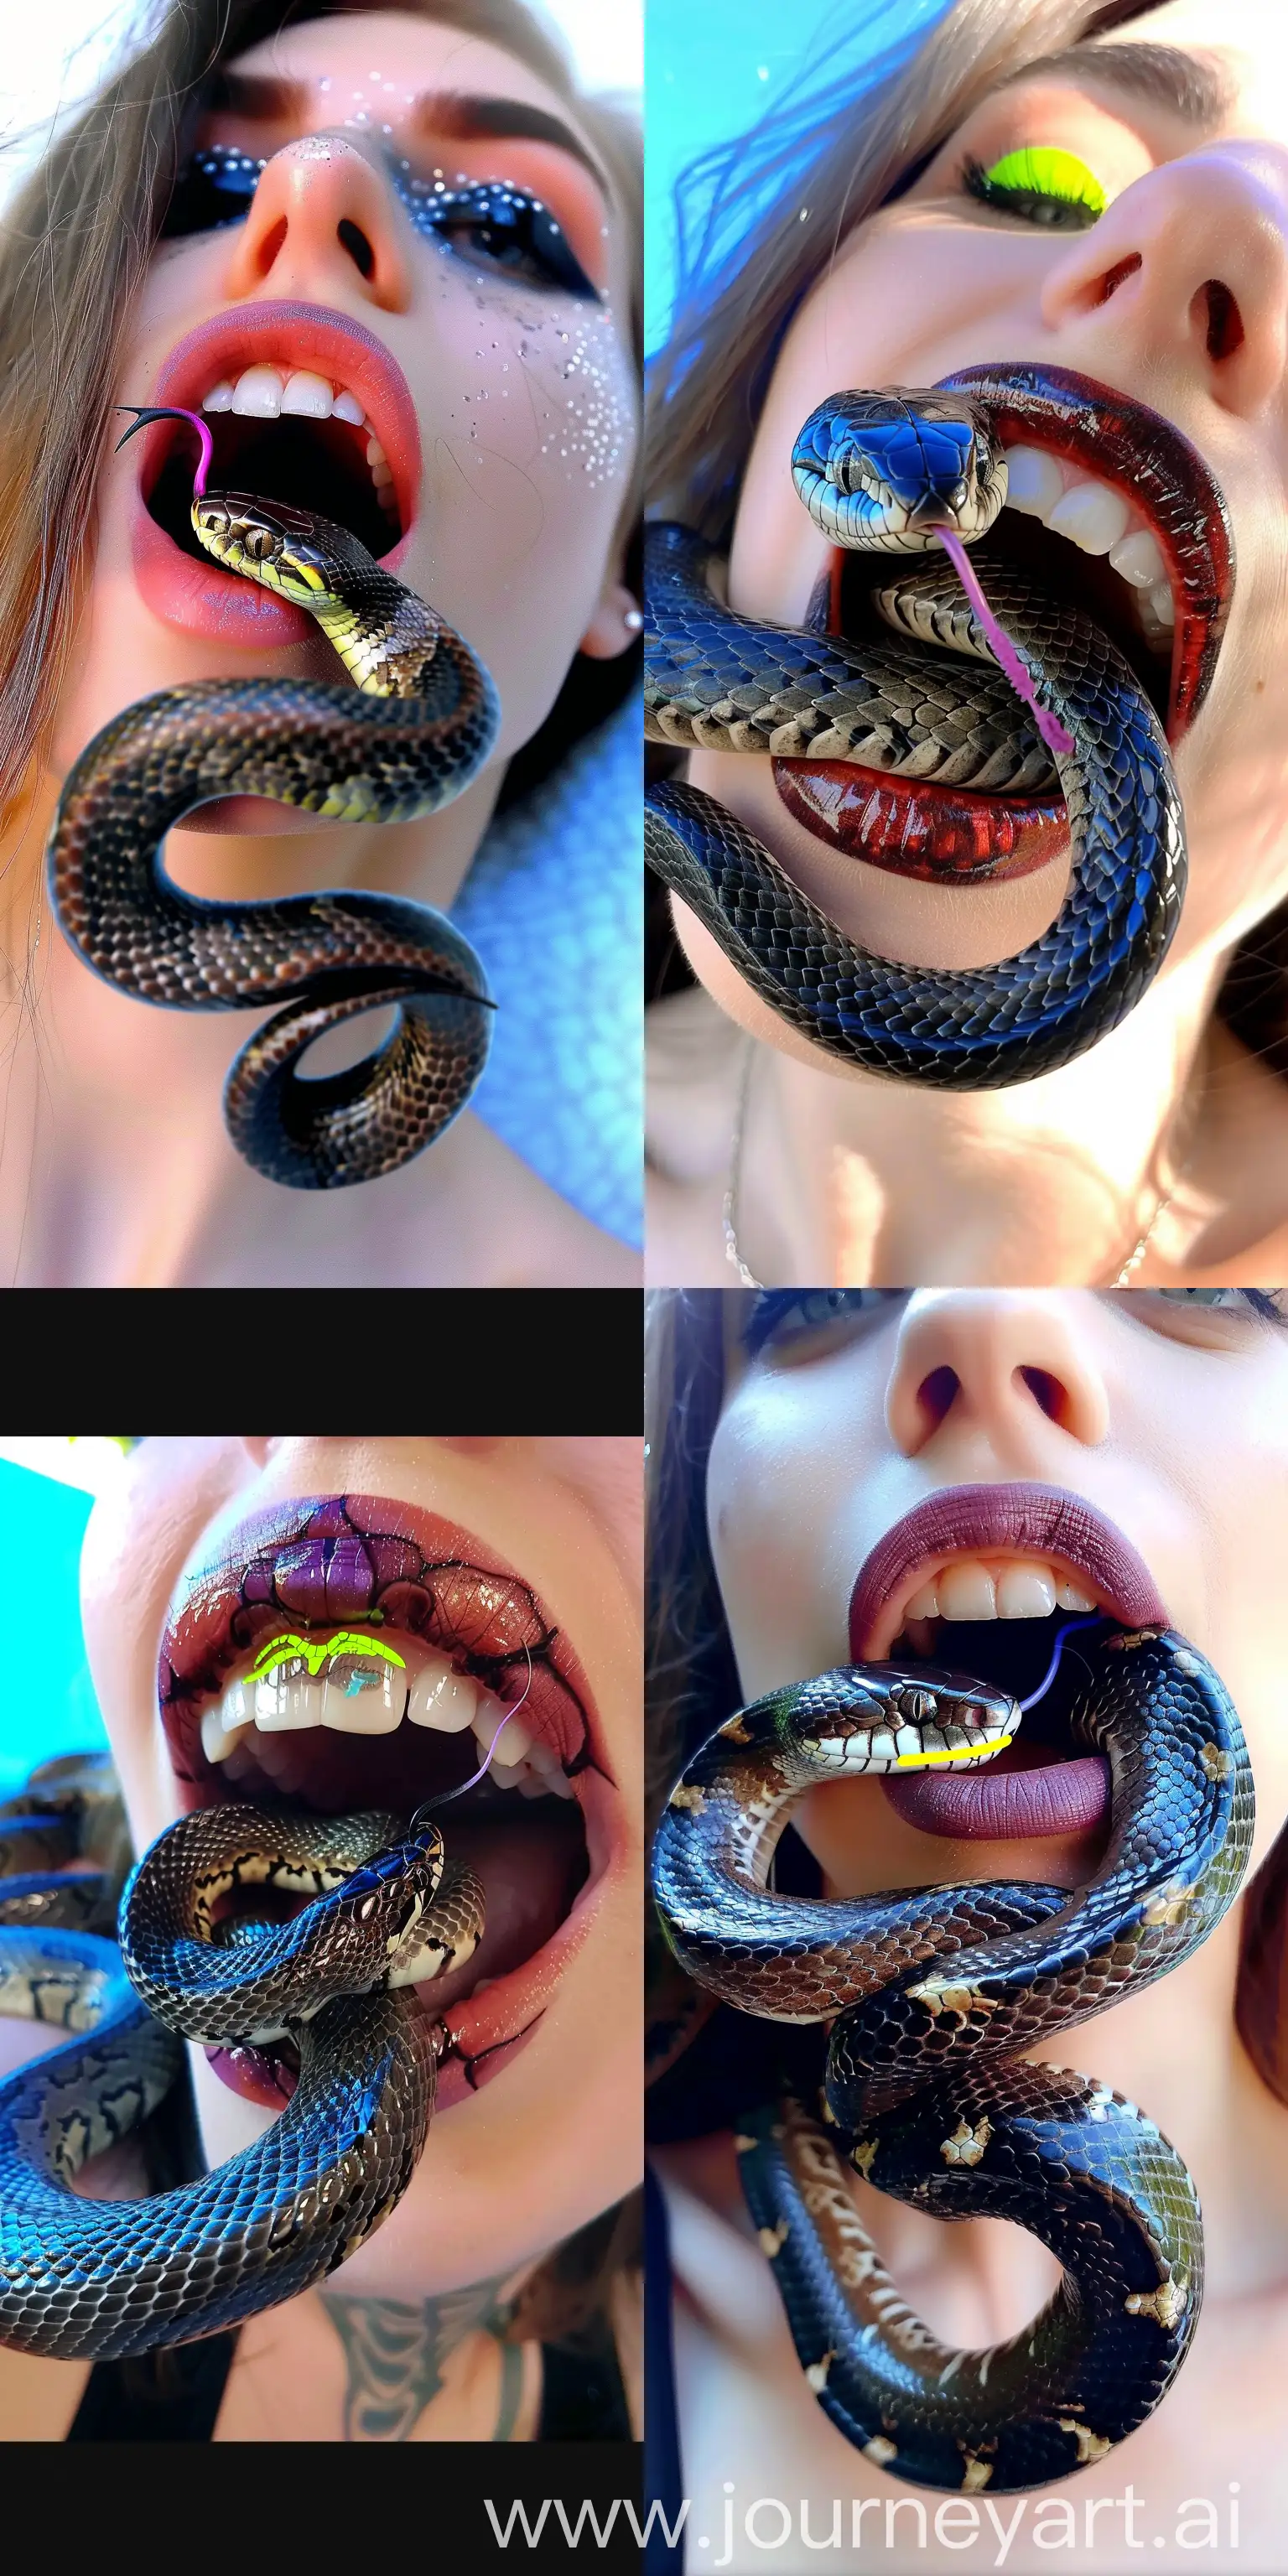 Woman-with-Snake-and-Neon-Purple-Lipstick-in-Studio